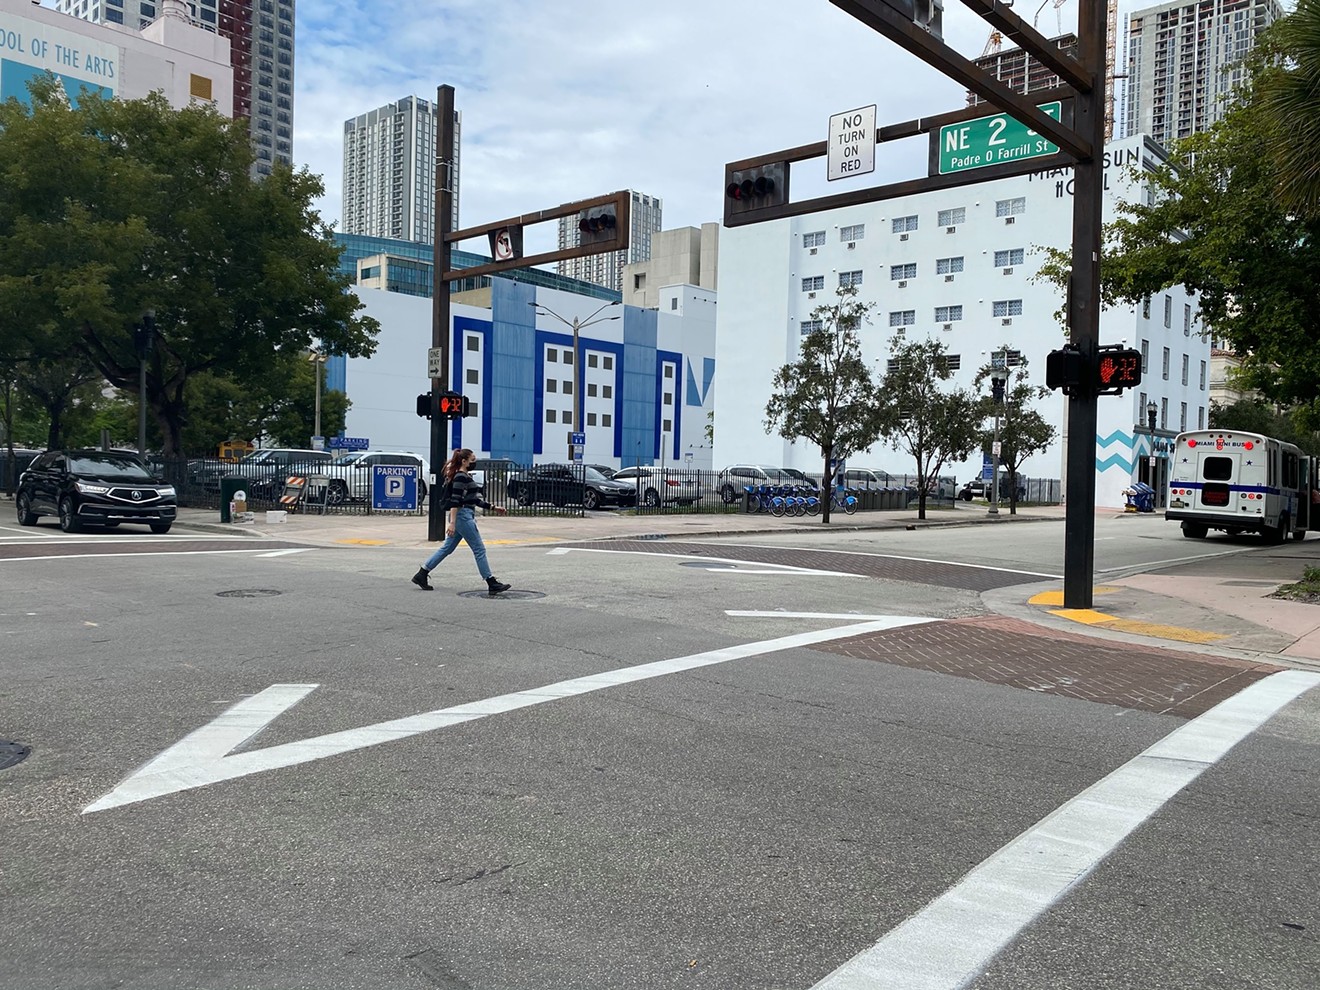 A scramble crosswalk, which allows pedestrians to cross the street in any direction, was installed in downtown Miami.